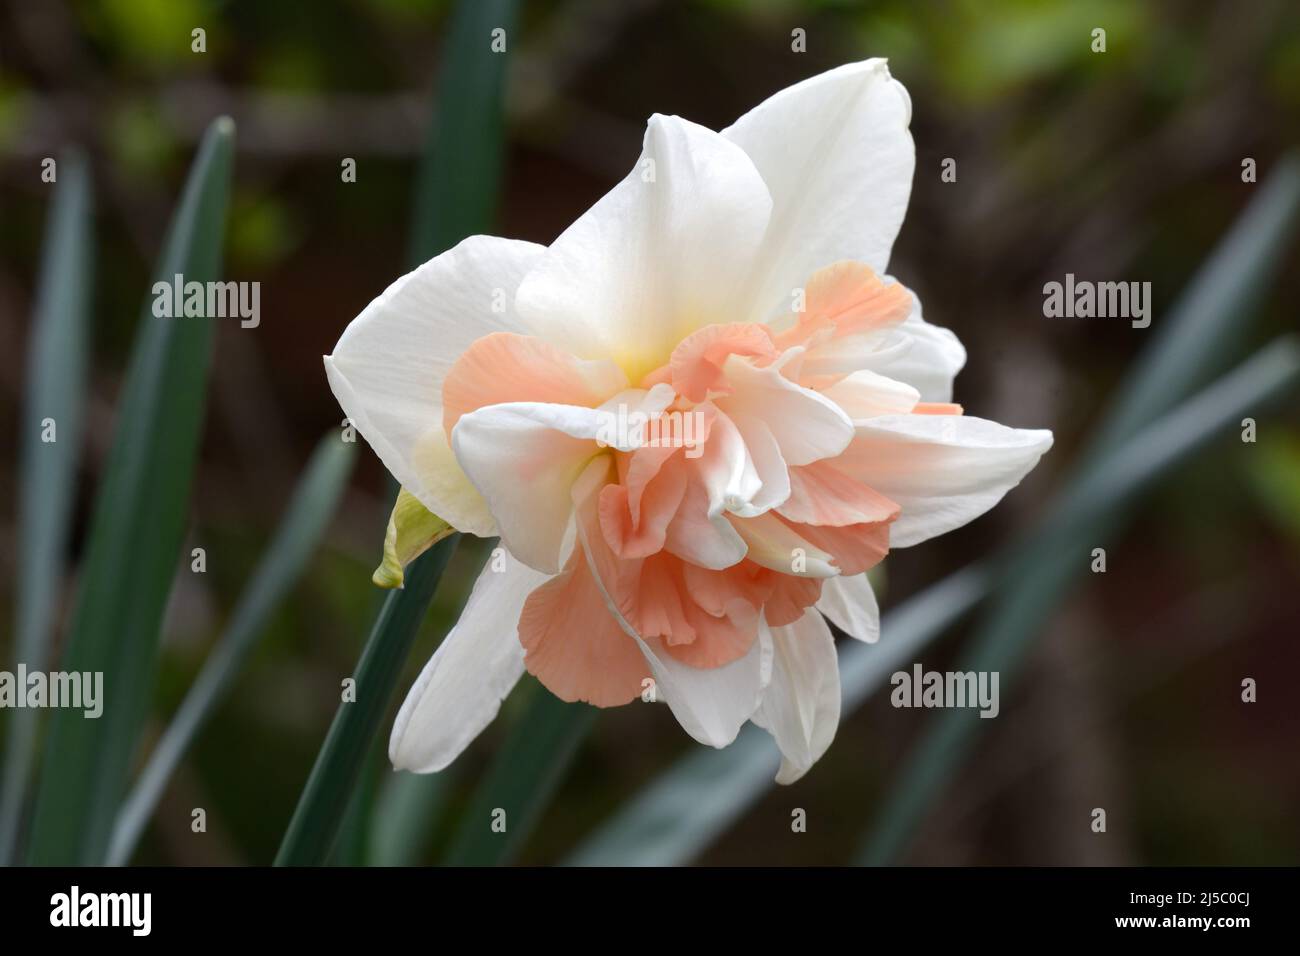 Narcissus Replete Daffodil Repleate flower bloom Stock Photo